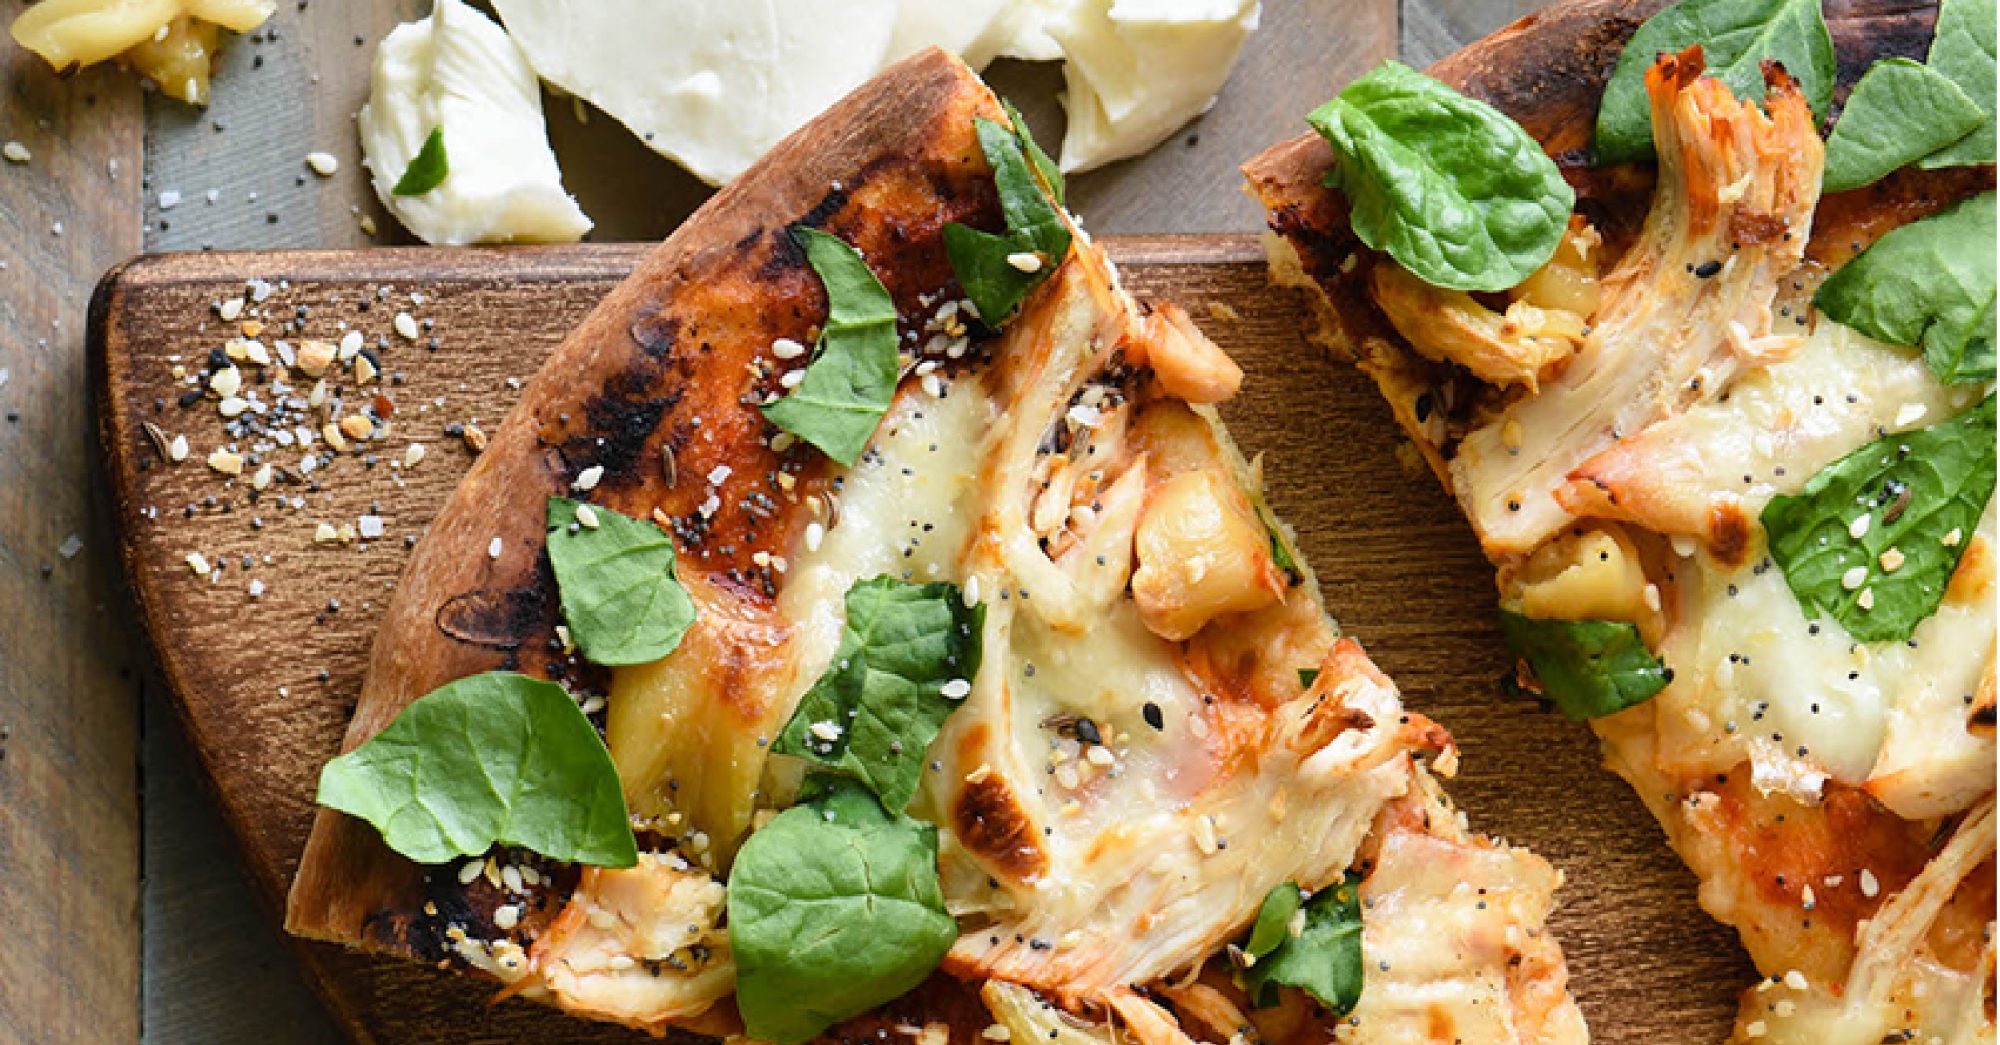 Grilled Chicken Pizza with Mozzarella and Roasted Garlic